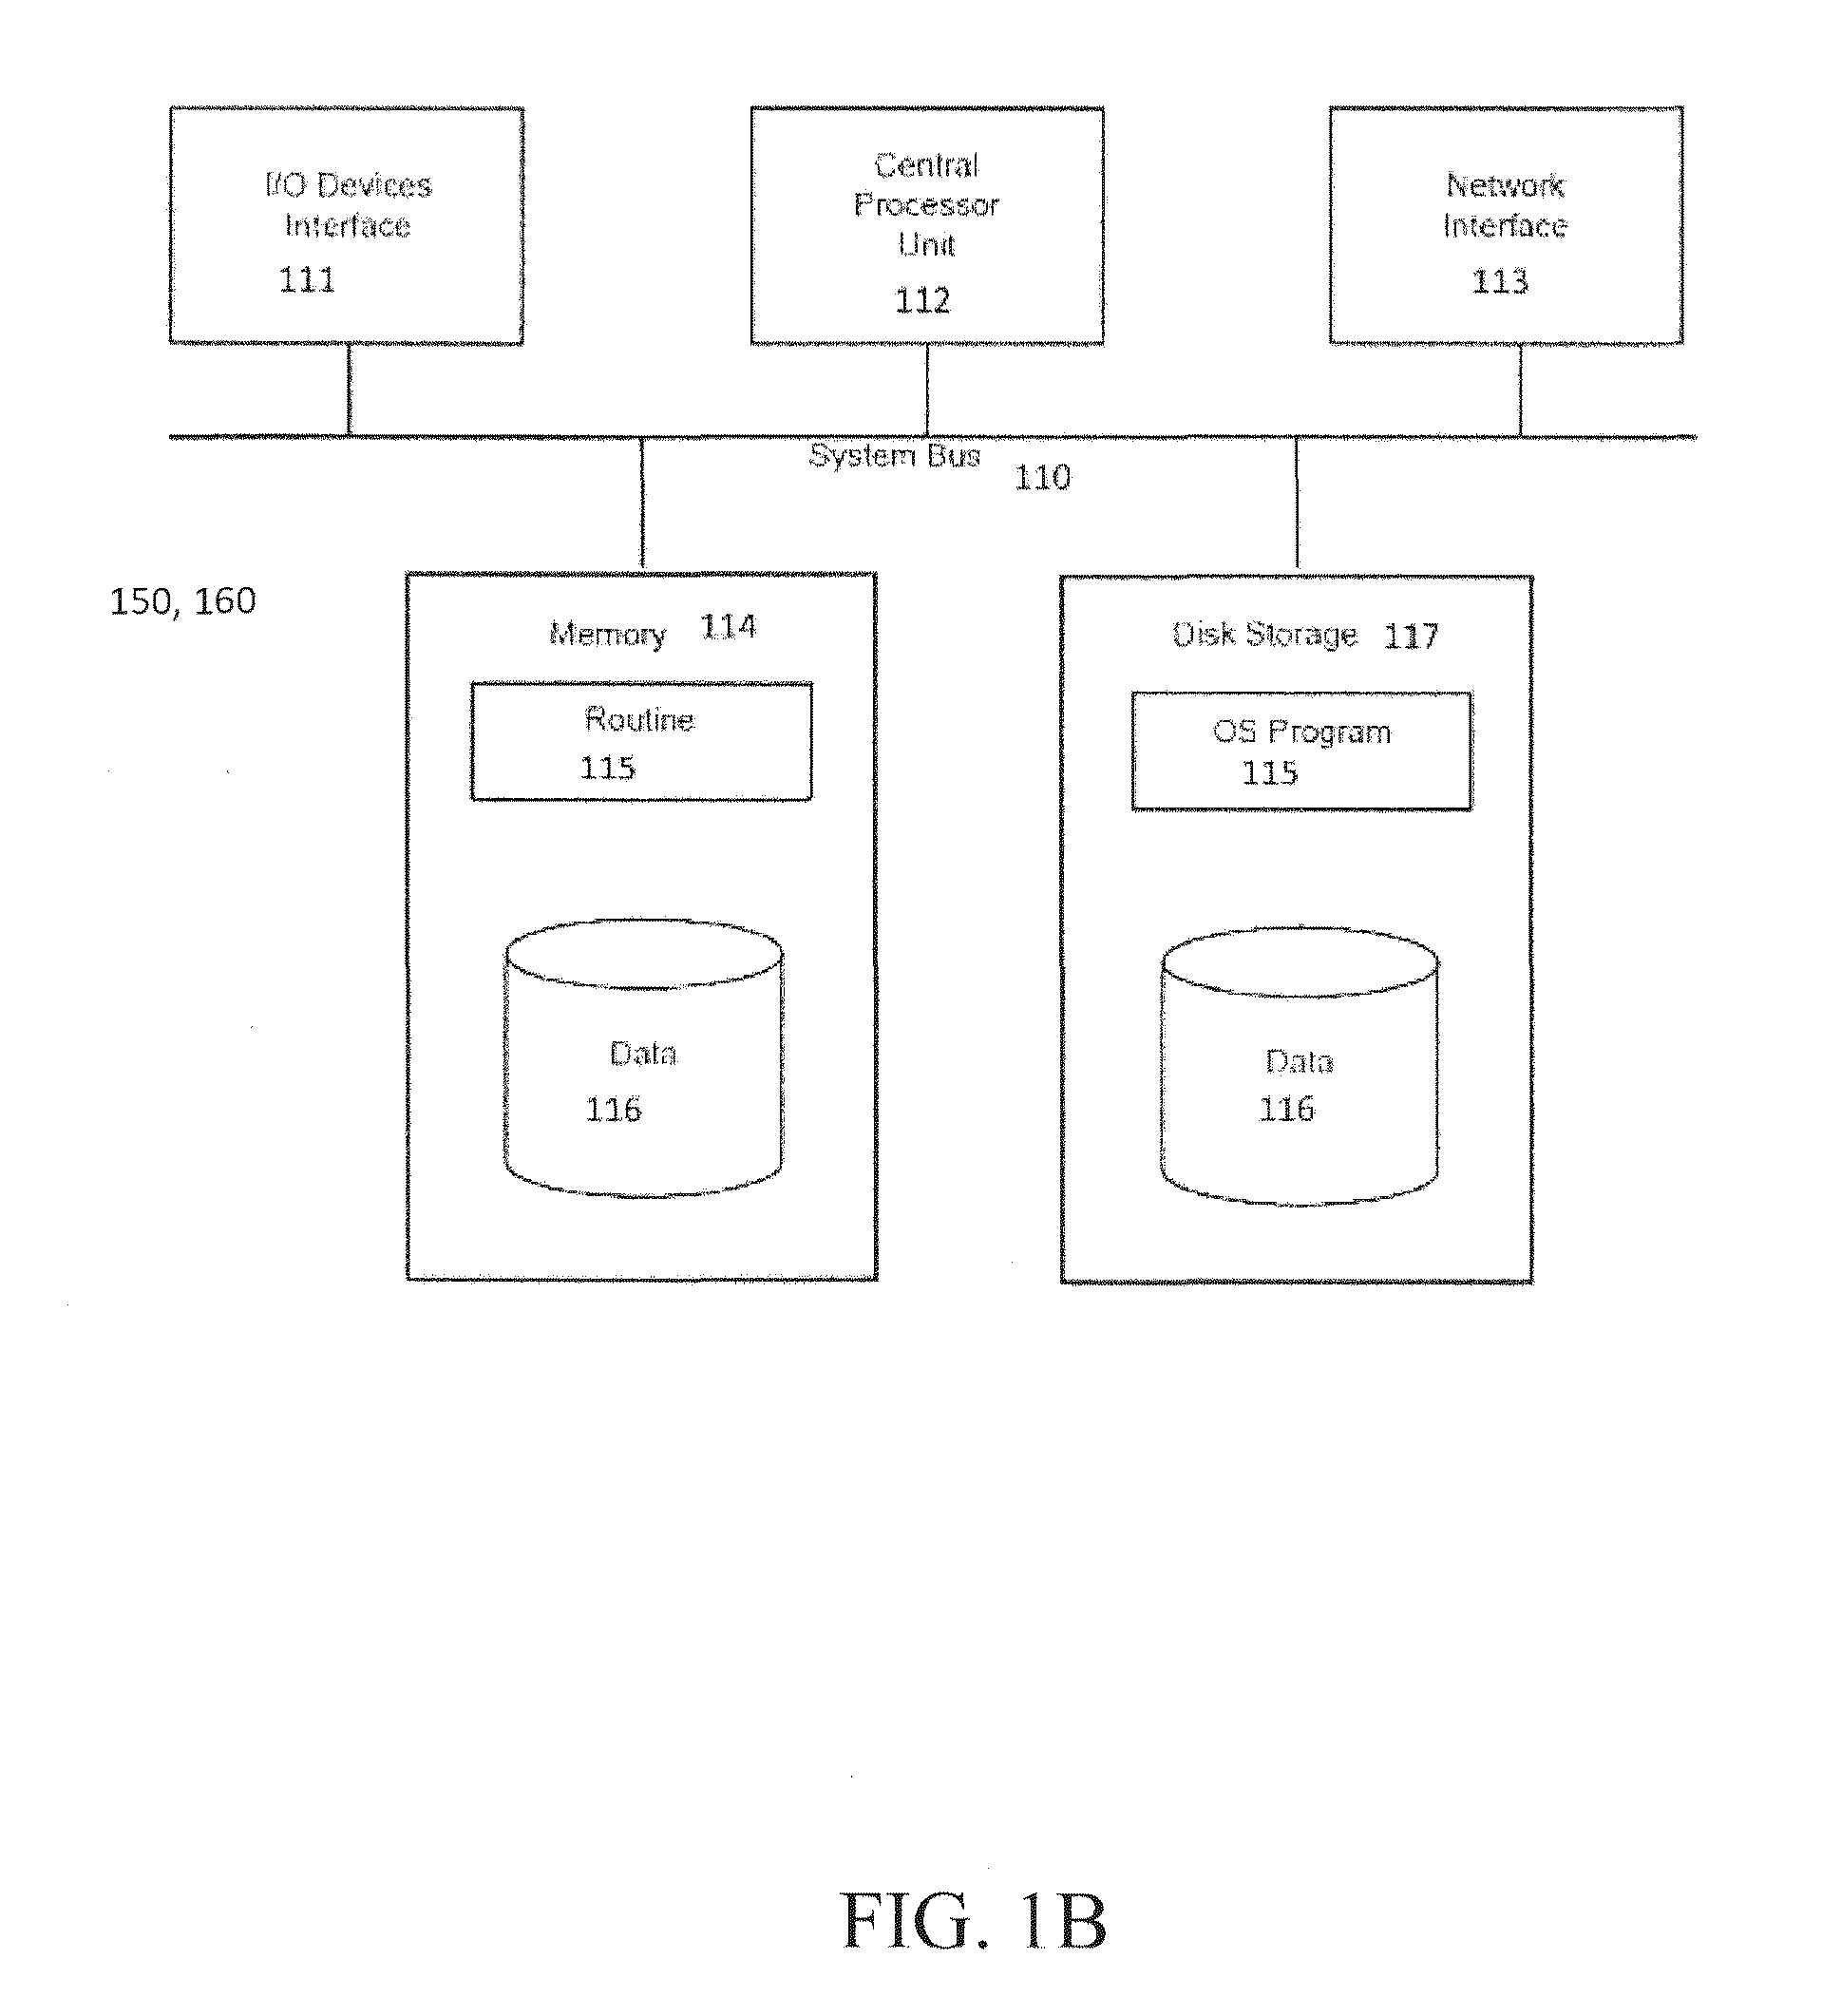 Locking Applications and Devices Using Secure Out-of-Band Channels